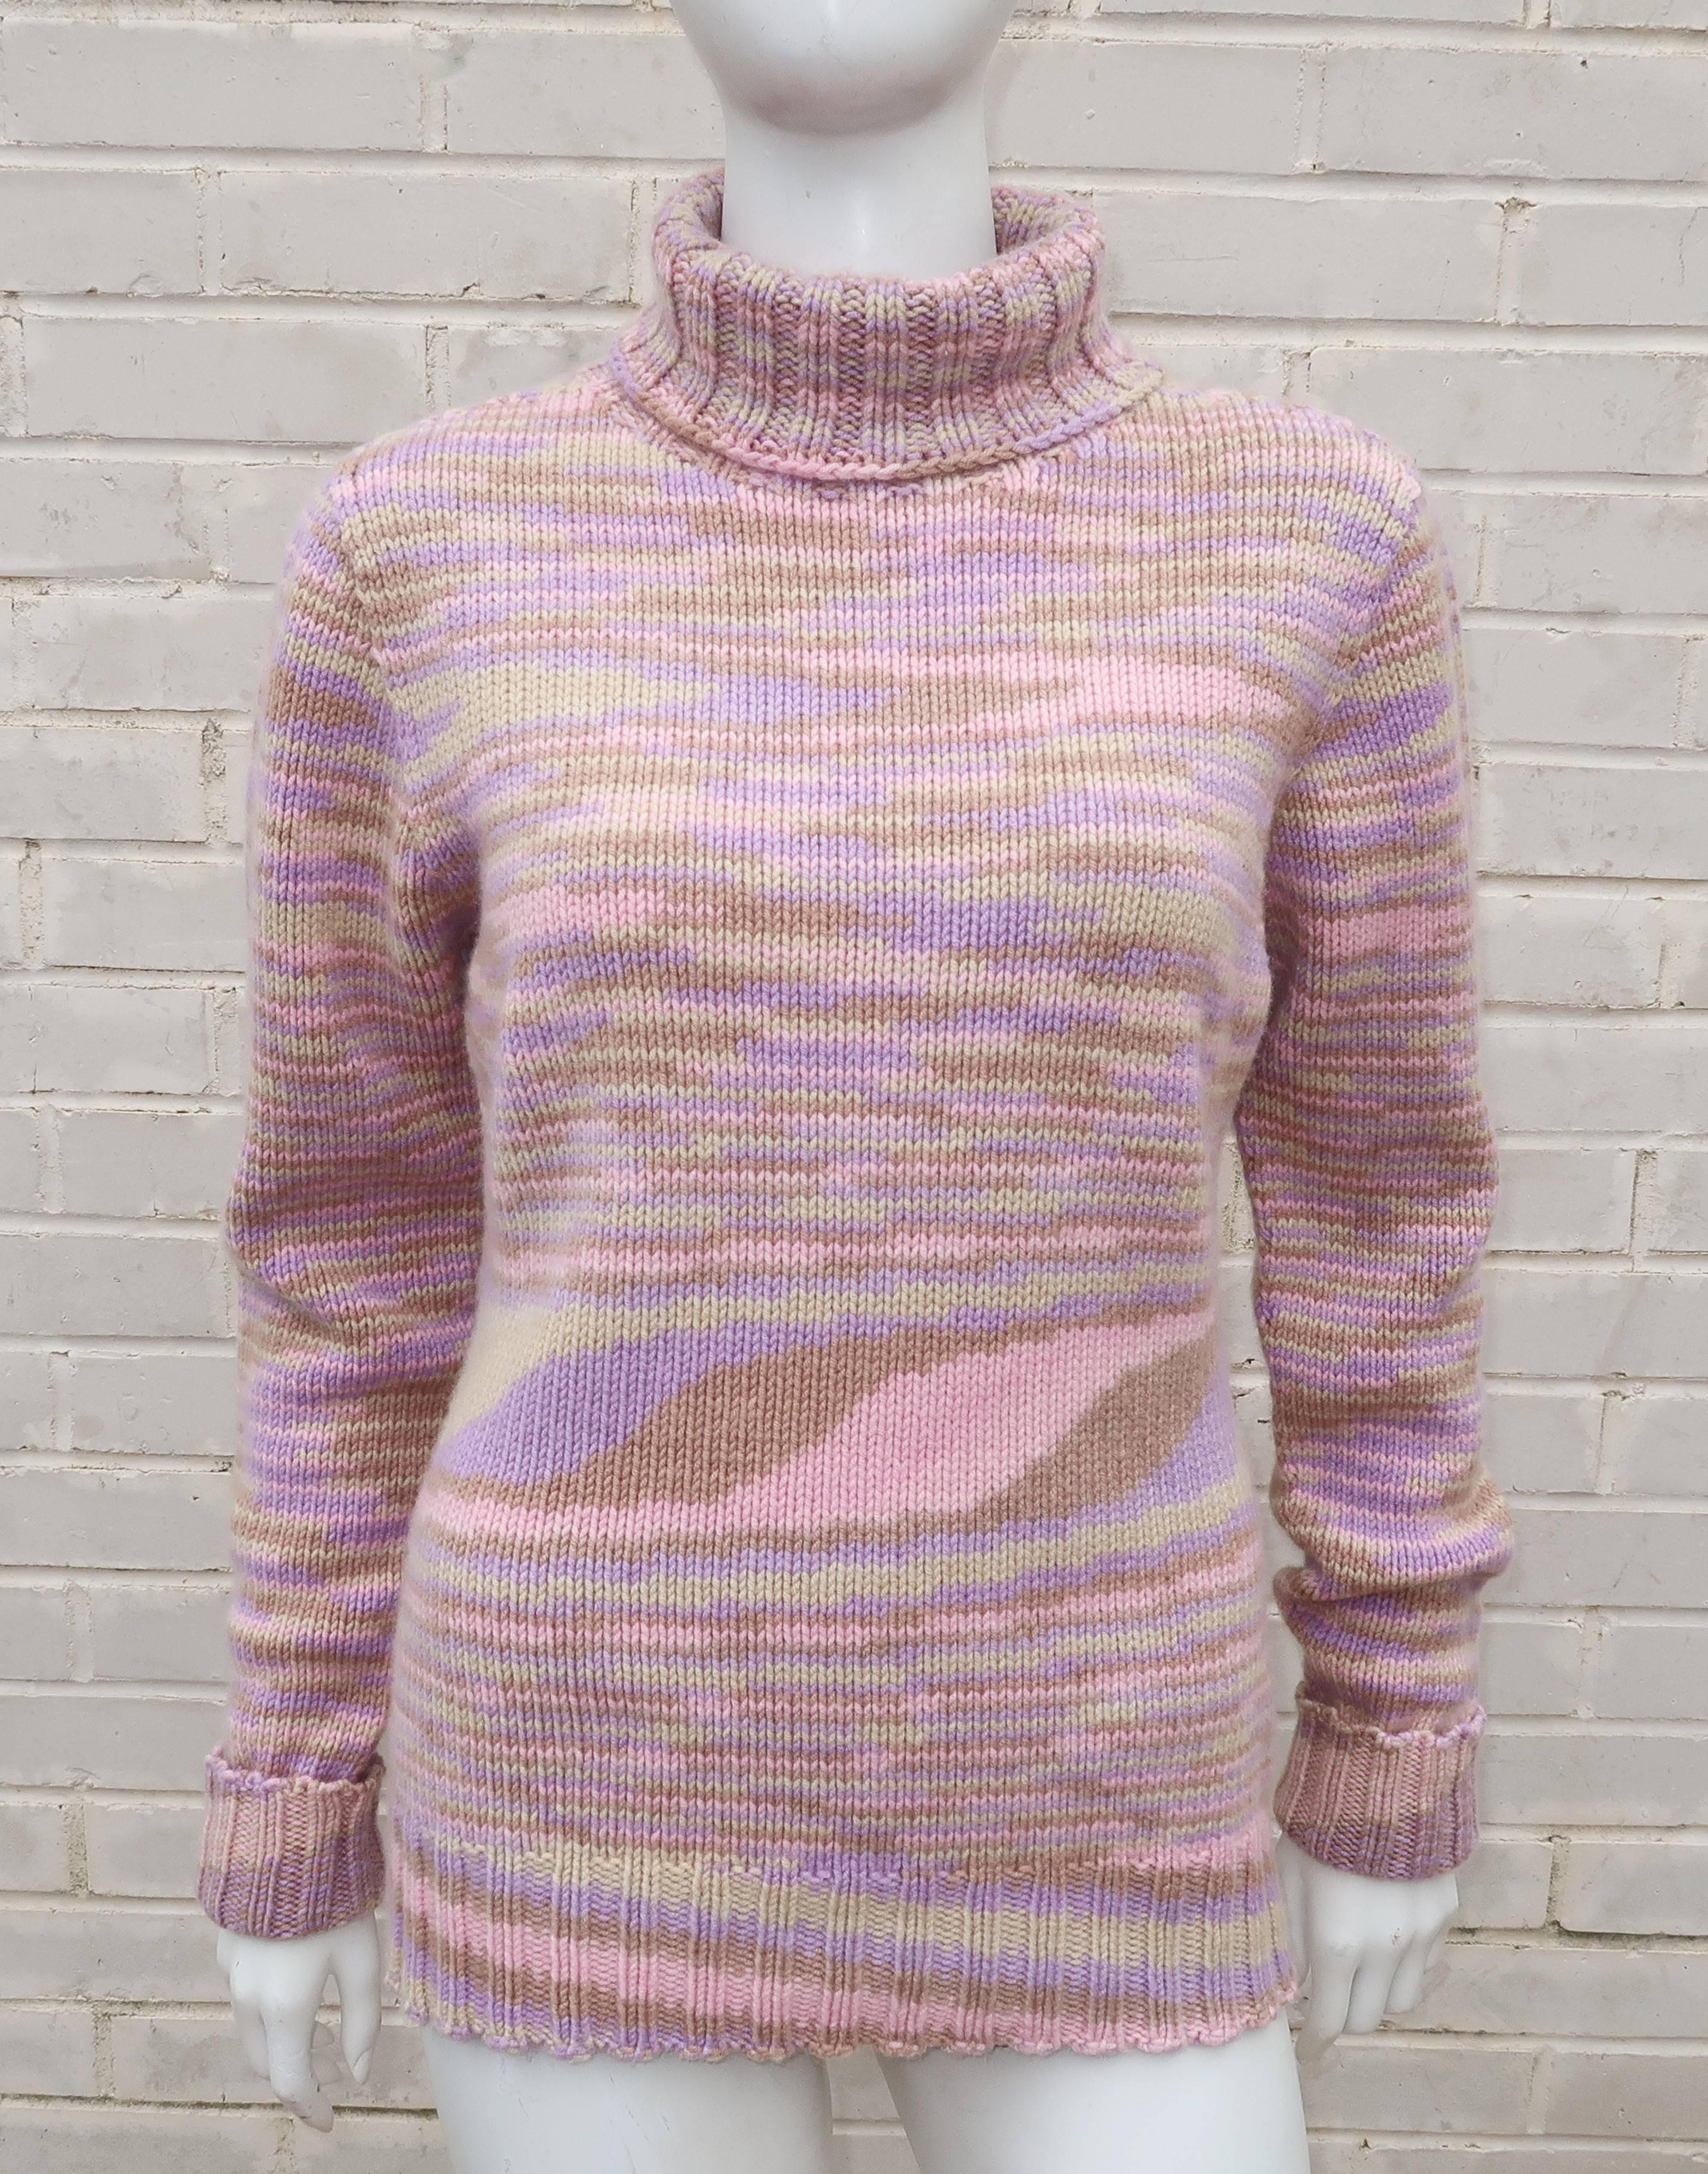 This 1980’s Missoni turtleneck sweater is a tactile combination of cozy cashmere and subtle op art design.  The pastel color palette of pink, beige, lilac and sage green is mixed into a horizontal striped pattern with dips and curves in unexpected